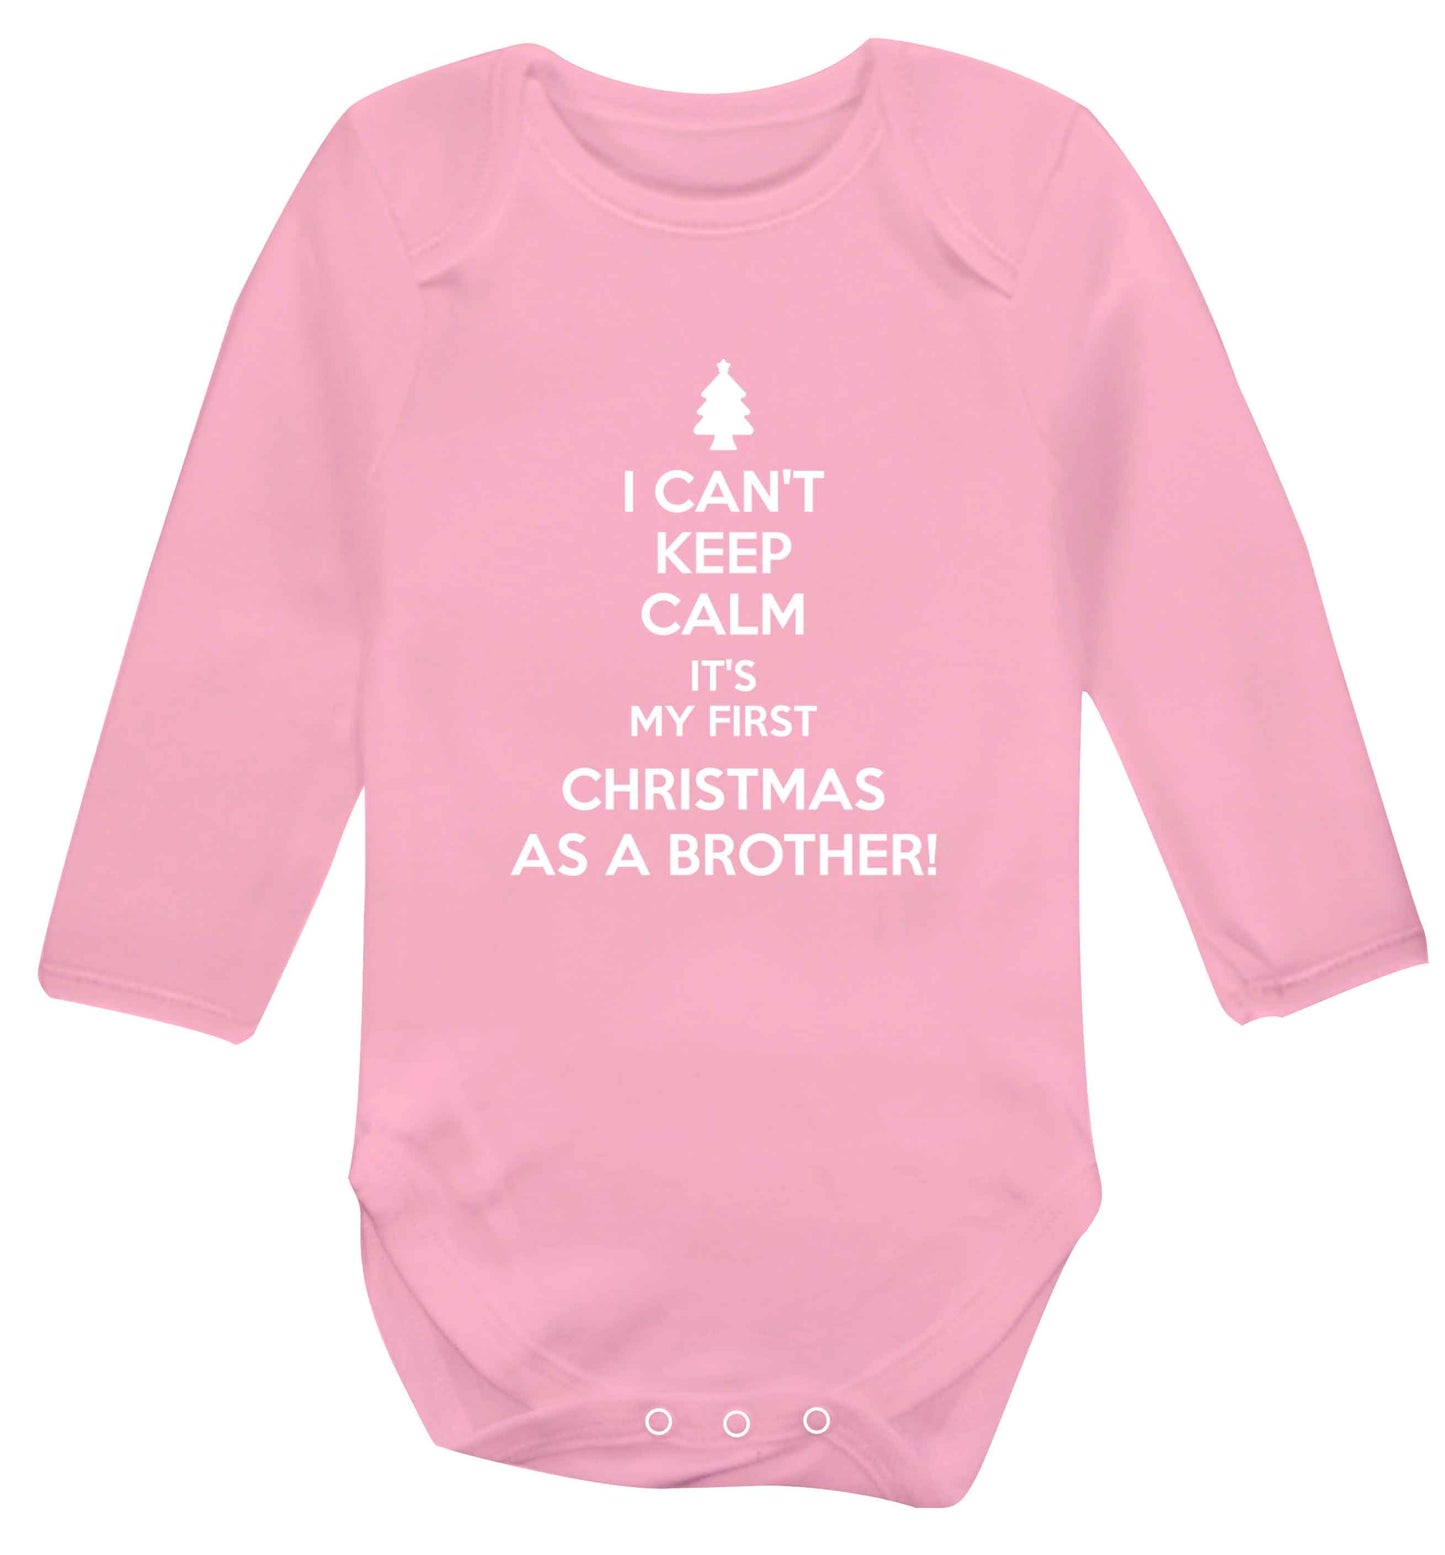 I can't keep calm it's my first Christmas as a brother! Baby Vest long sleeved pale pink 6-12 months